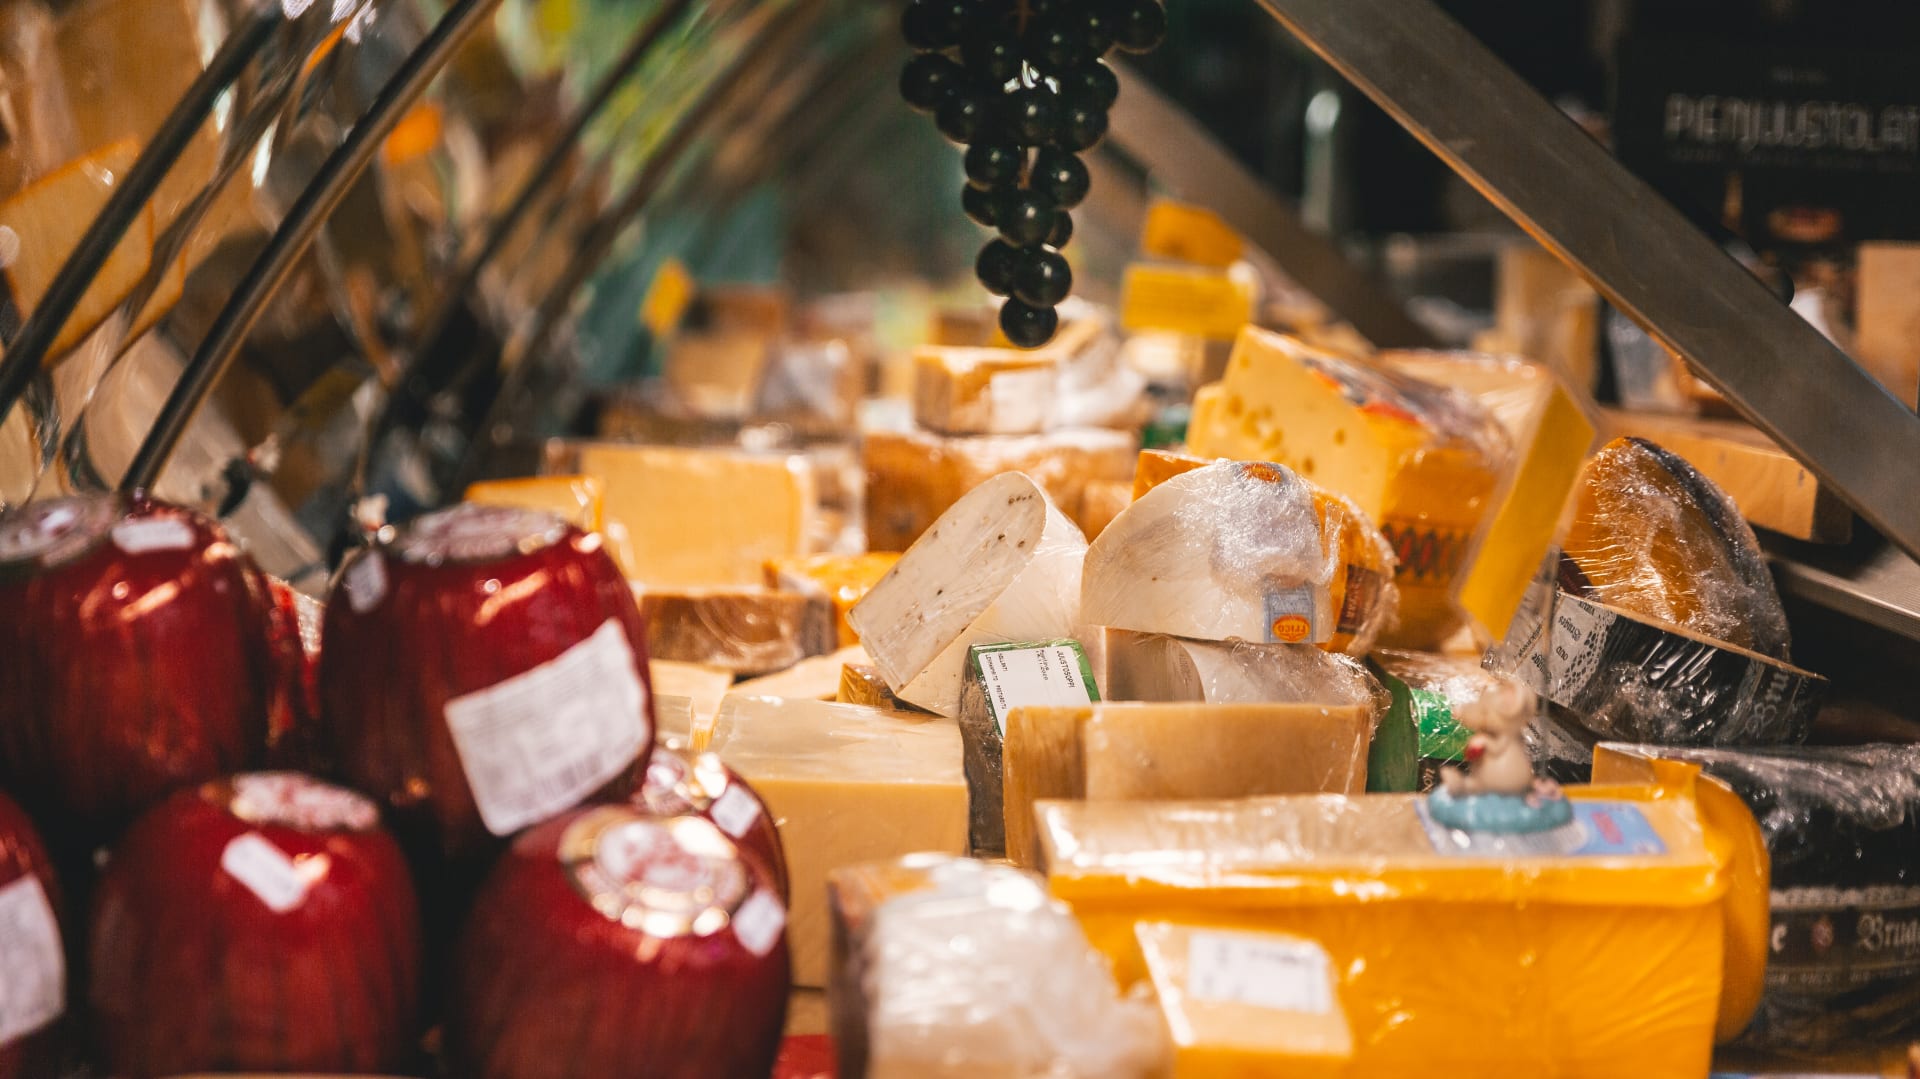 Cheese counter displaying wide variety of cheese types